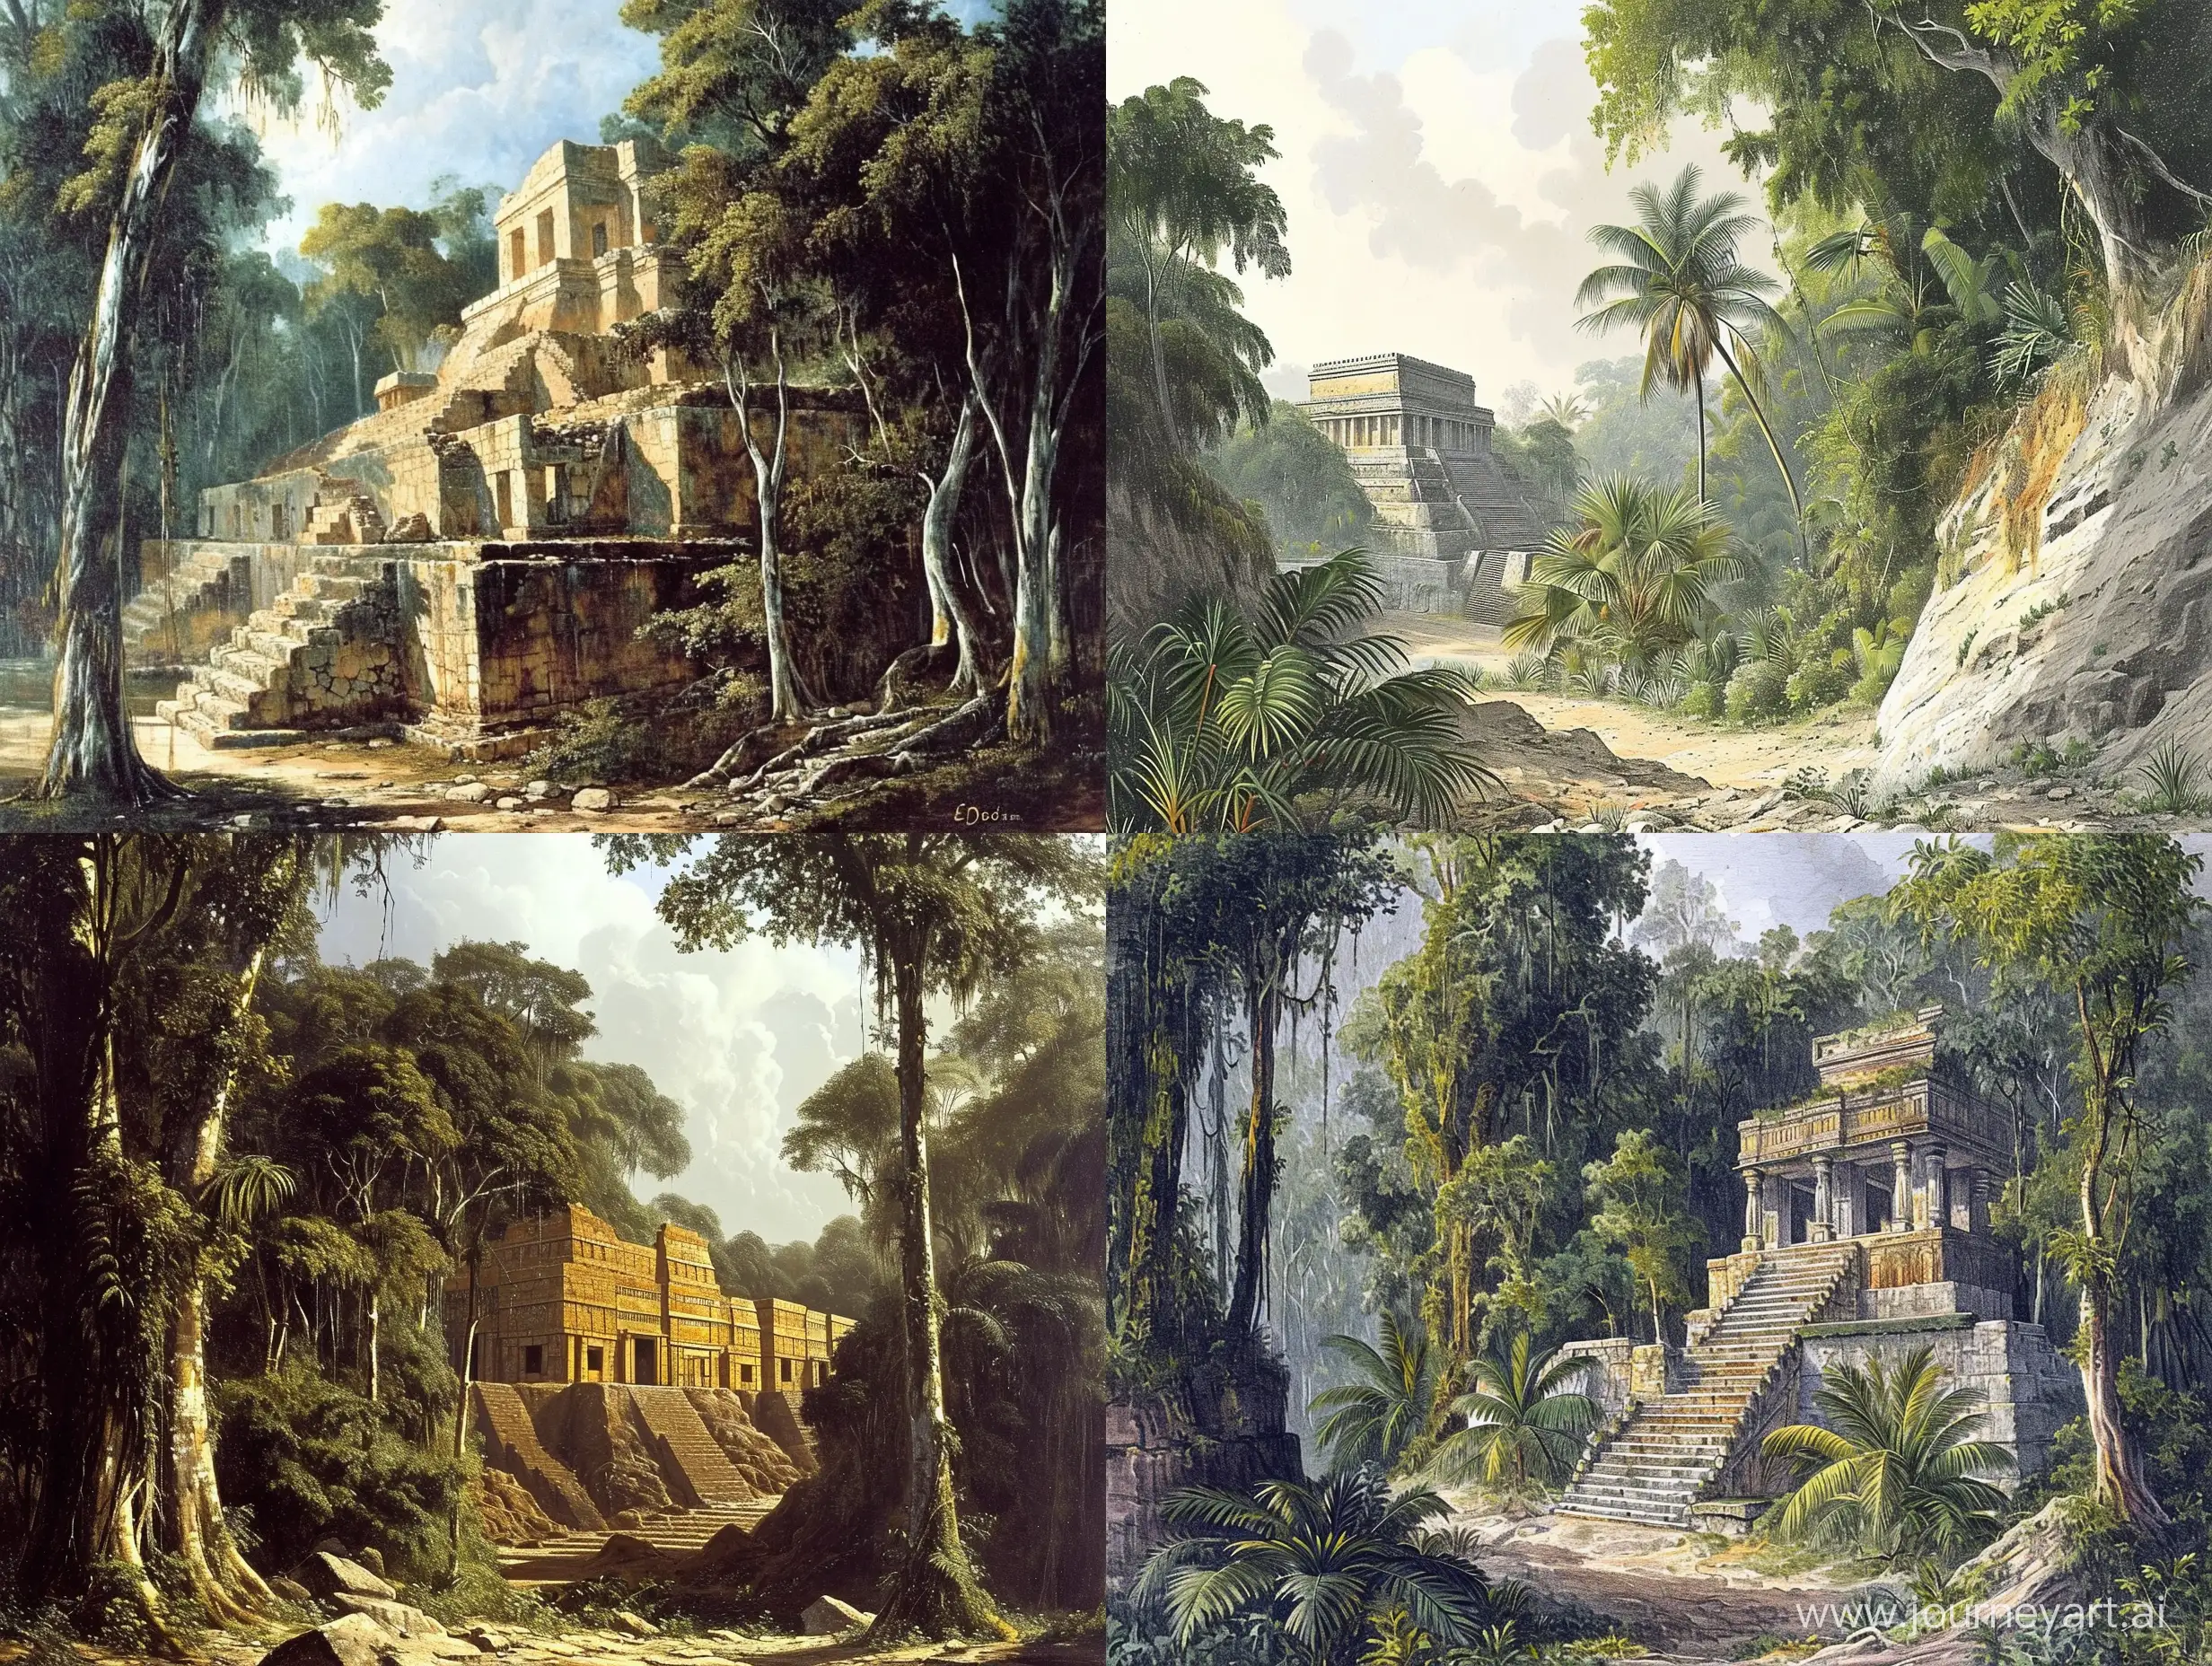 Colorful-Depiction-of-The-Lost-City-of-El-Dorado-in-the-Amazon-Jungle-by-JeanLon-Grme